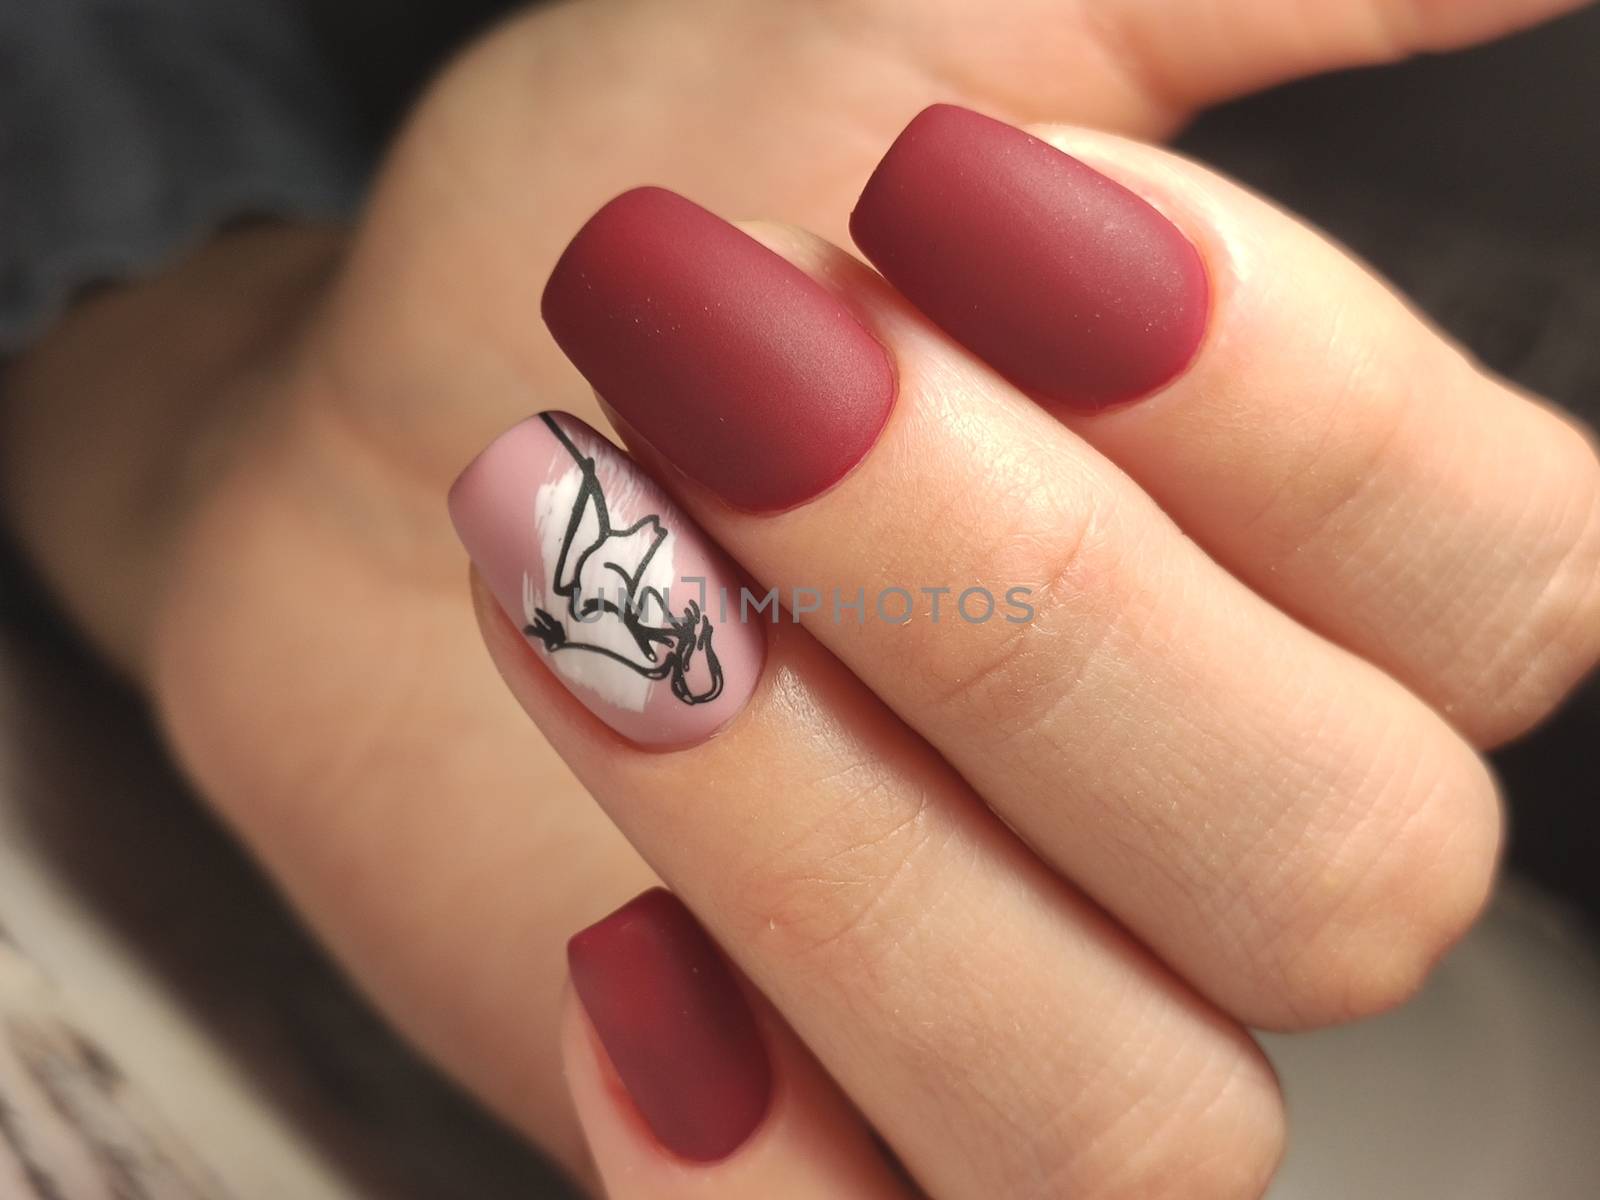 Autumn manicure. Beautyful nails design with autumn leaves. Top view. cozy autumn image.